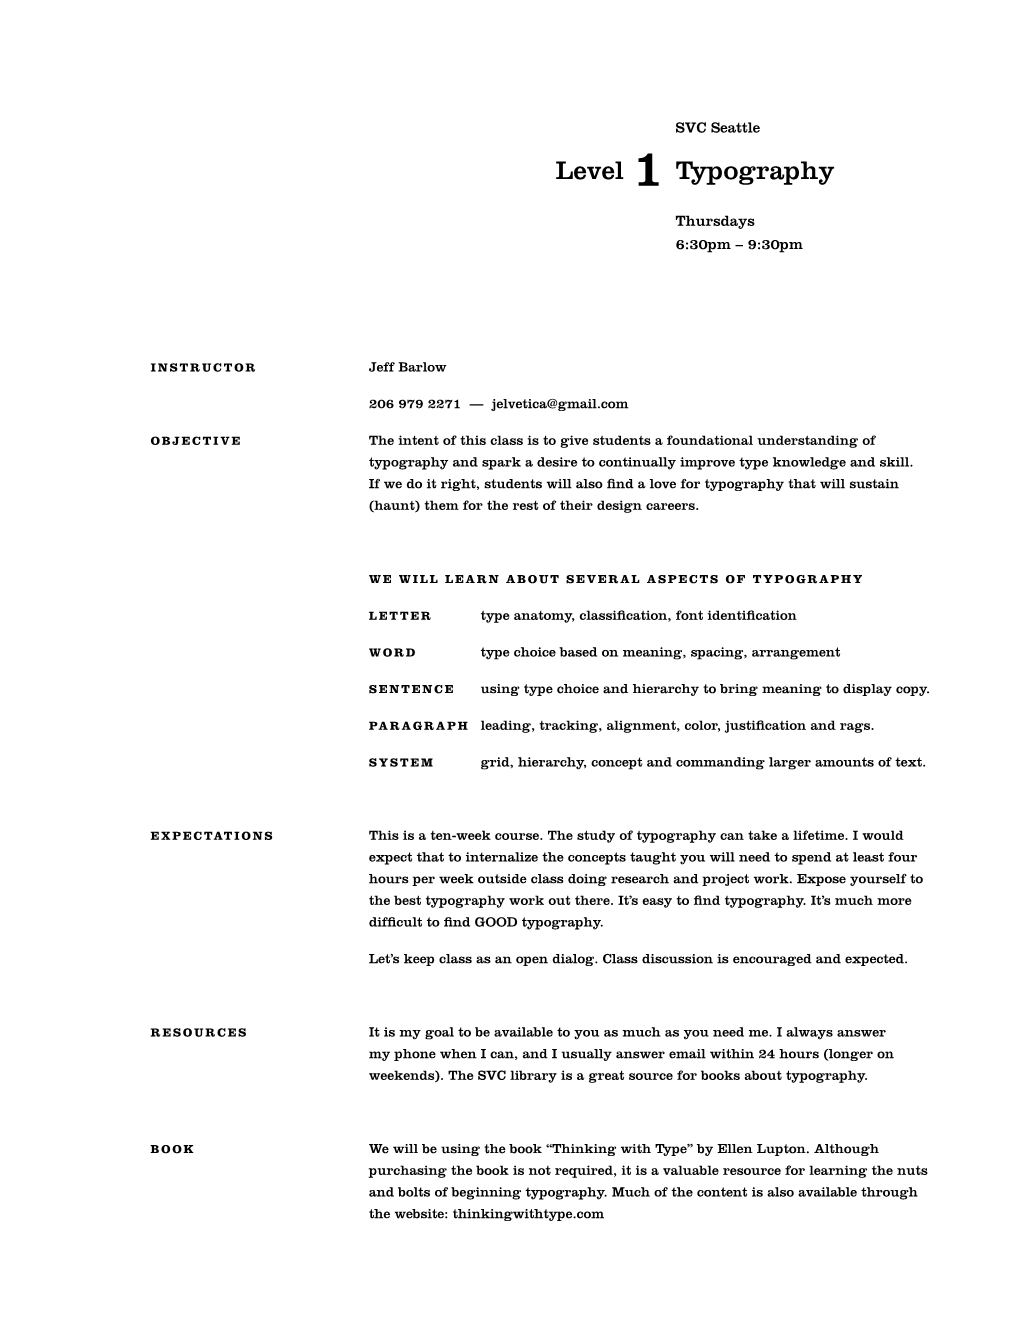 Level 1 Typography Course Outline